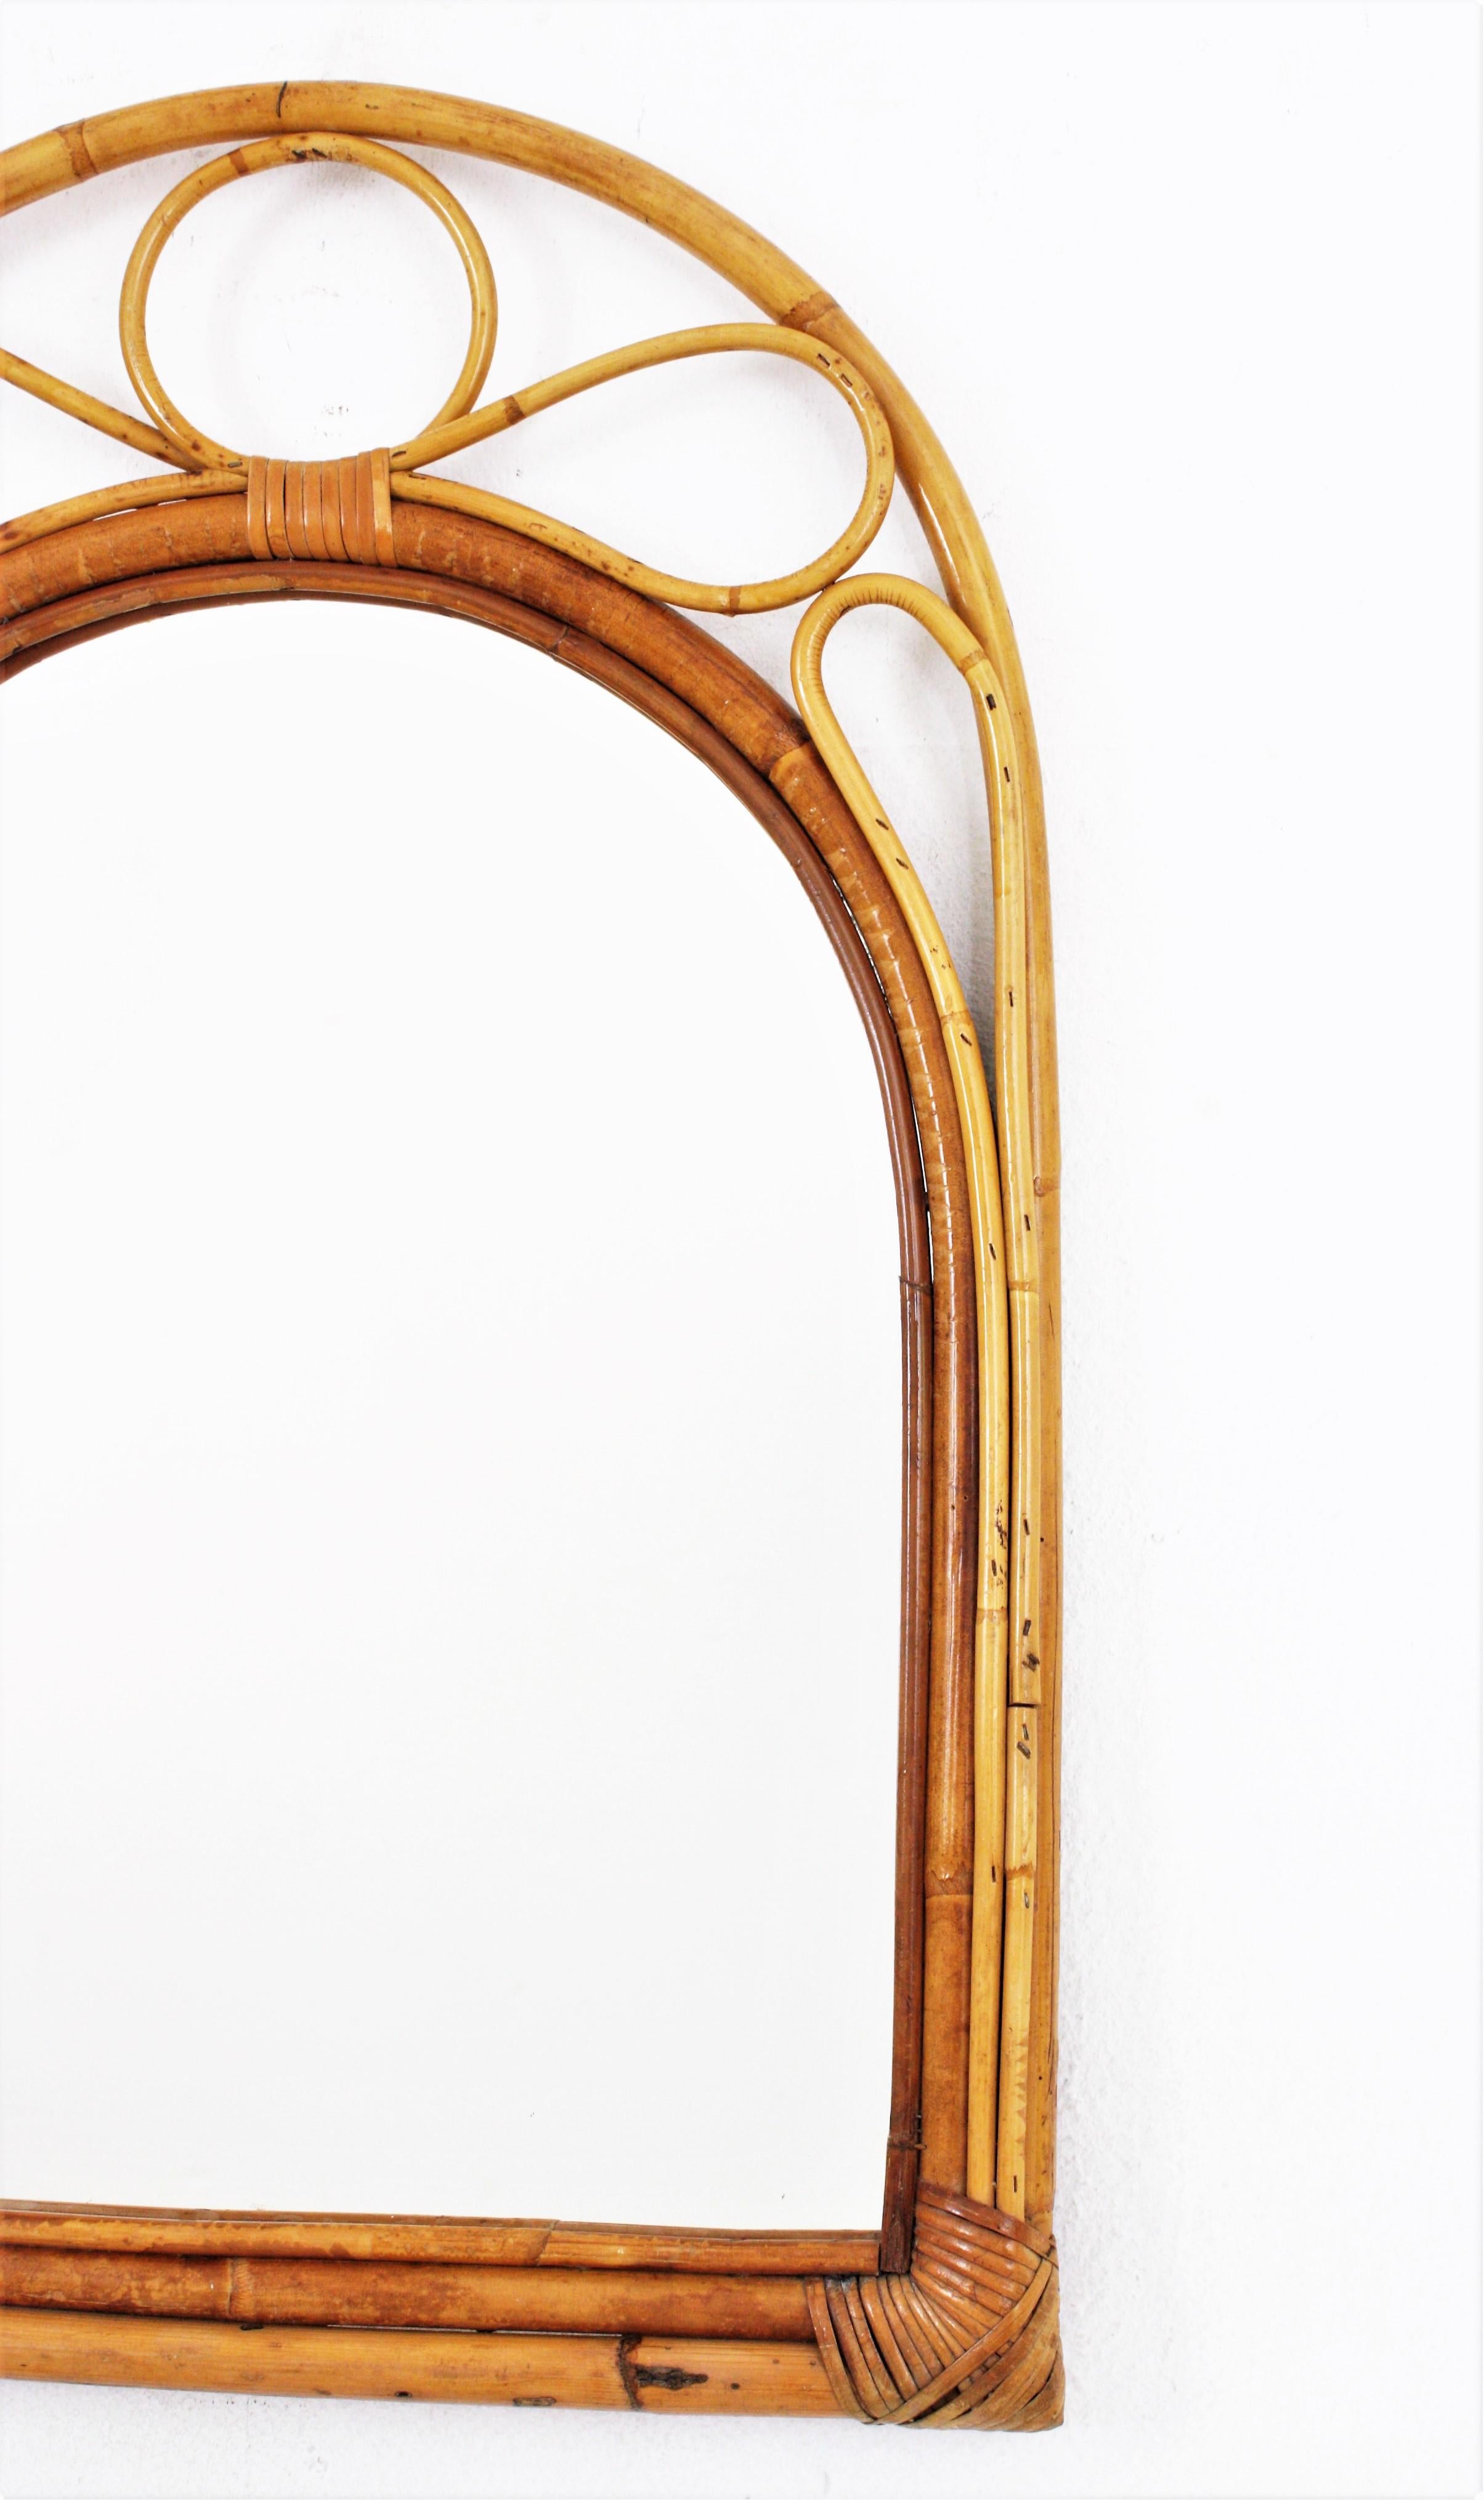 Hand-Crafted Spanish Bamboo Rattan Arched Wall Mirror, 1960s For Sale